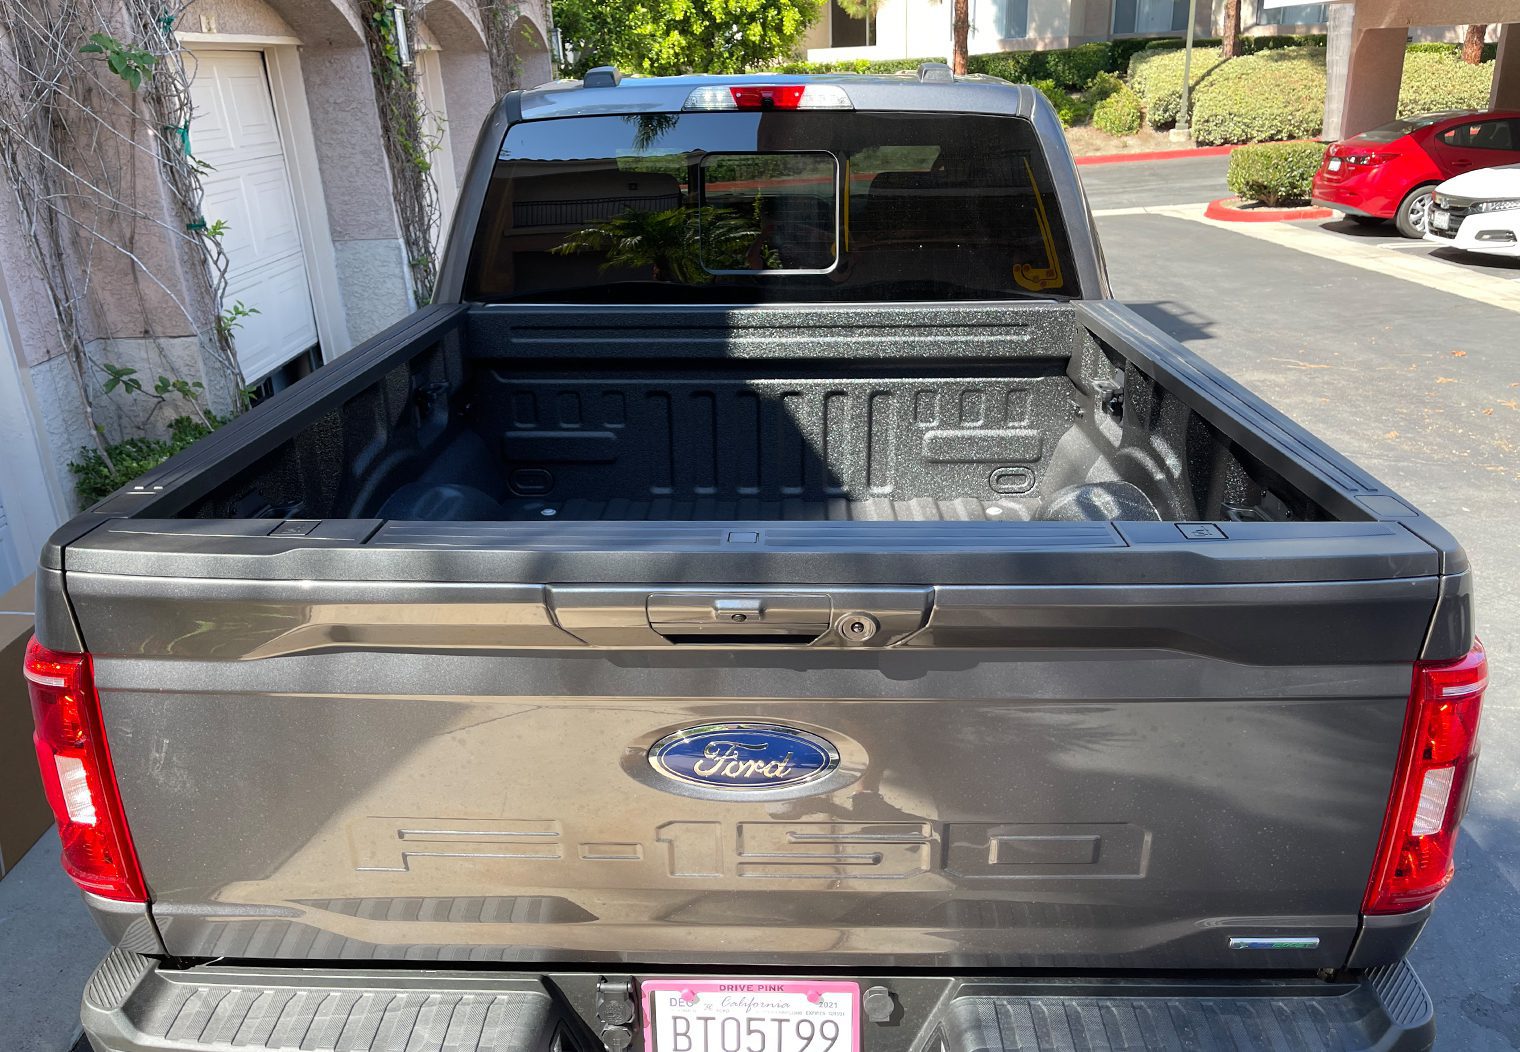 Picture of the bed of a 2021 Ford F150 with spray in bedliner